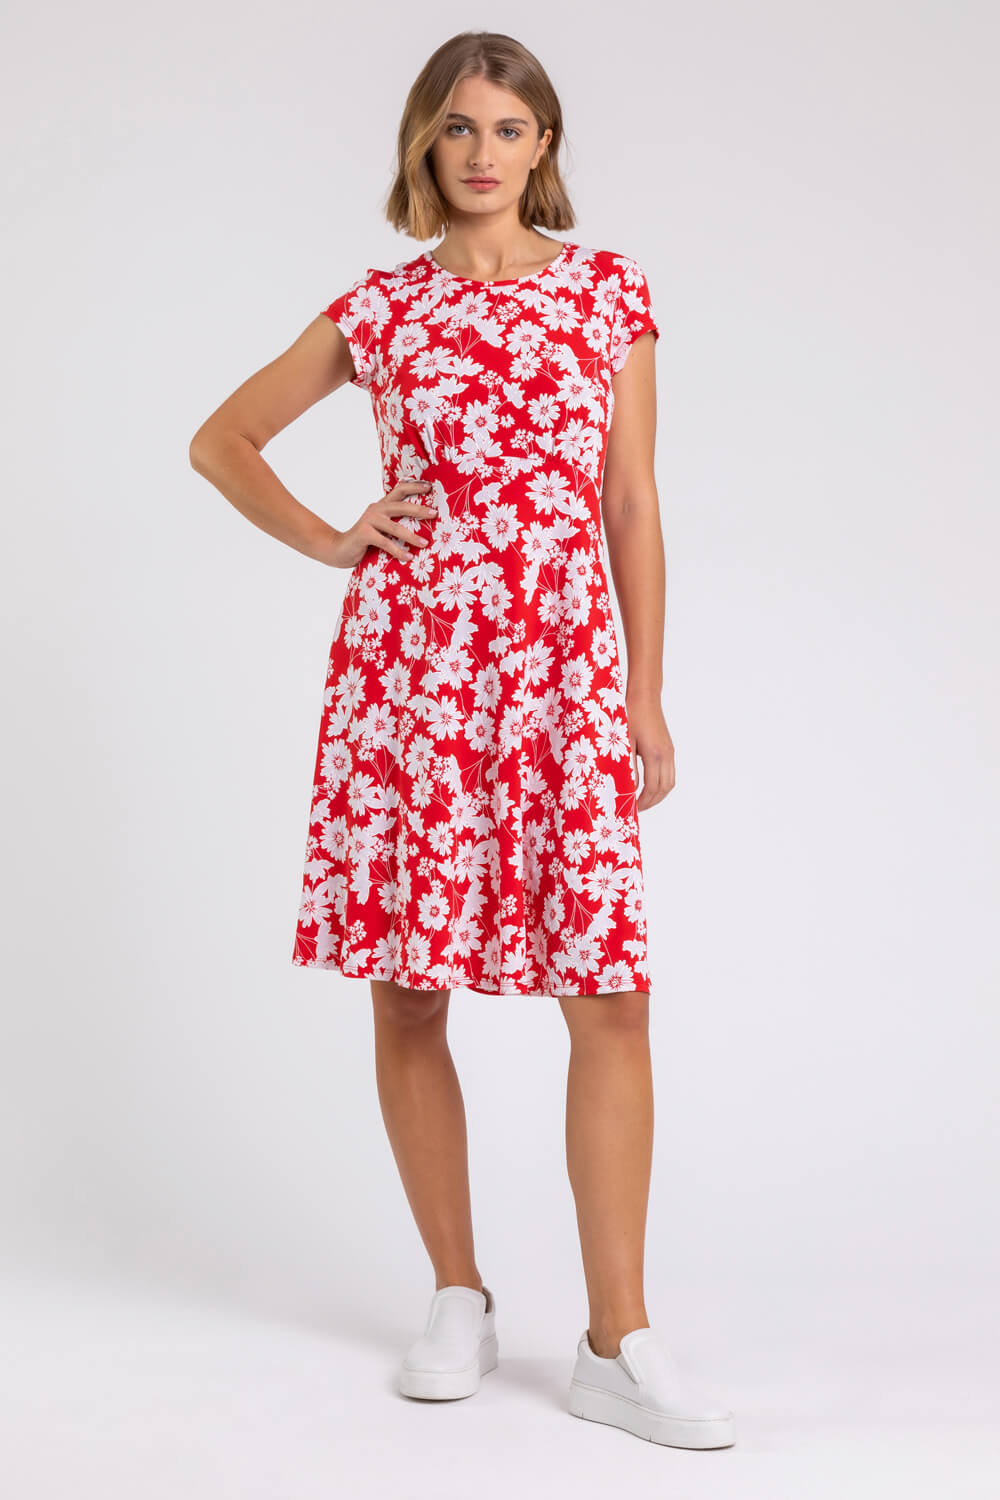 Red Floral Print Stretch Jersey Tea Dress, Image 3 of 4